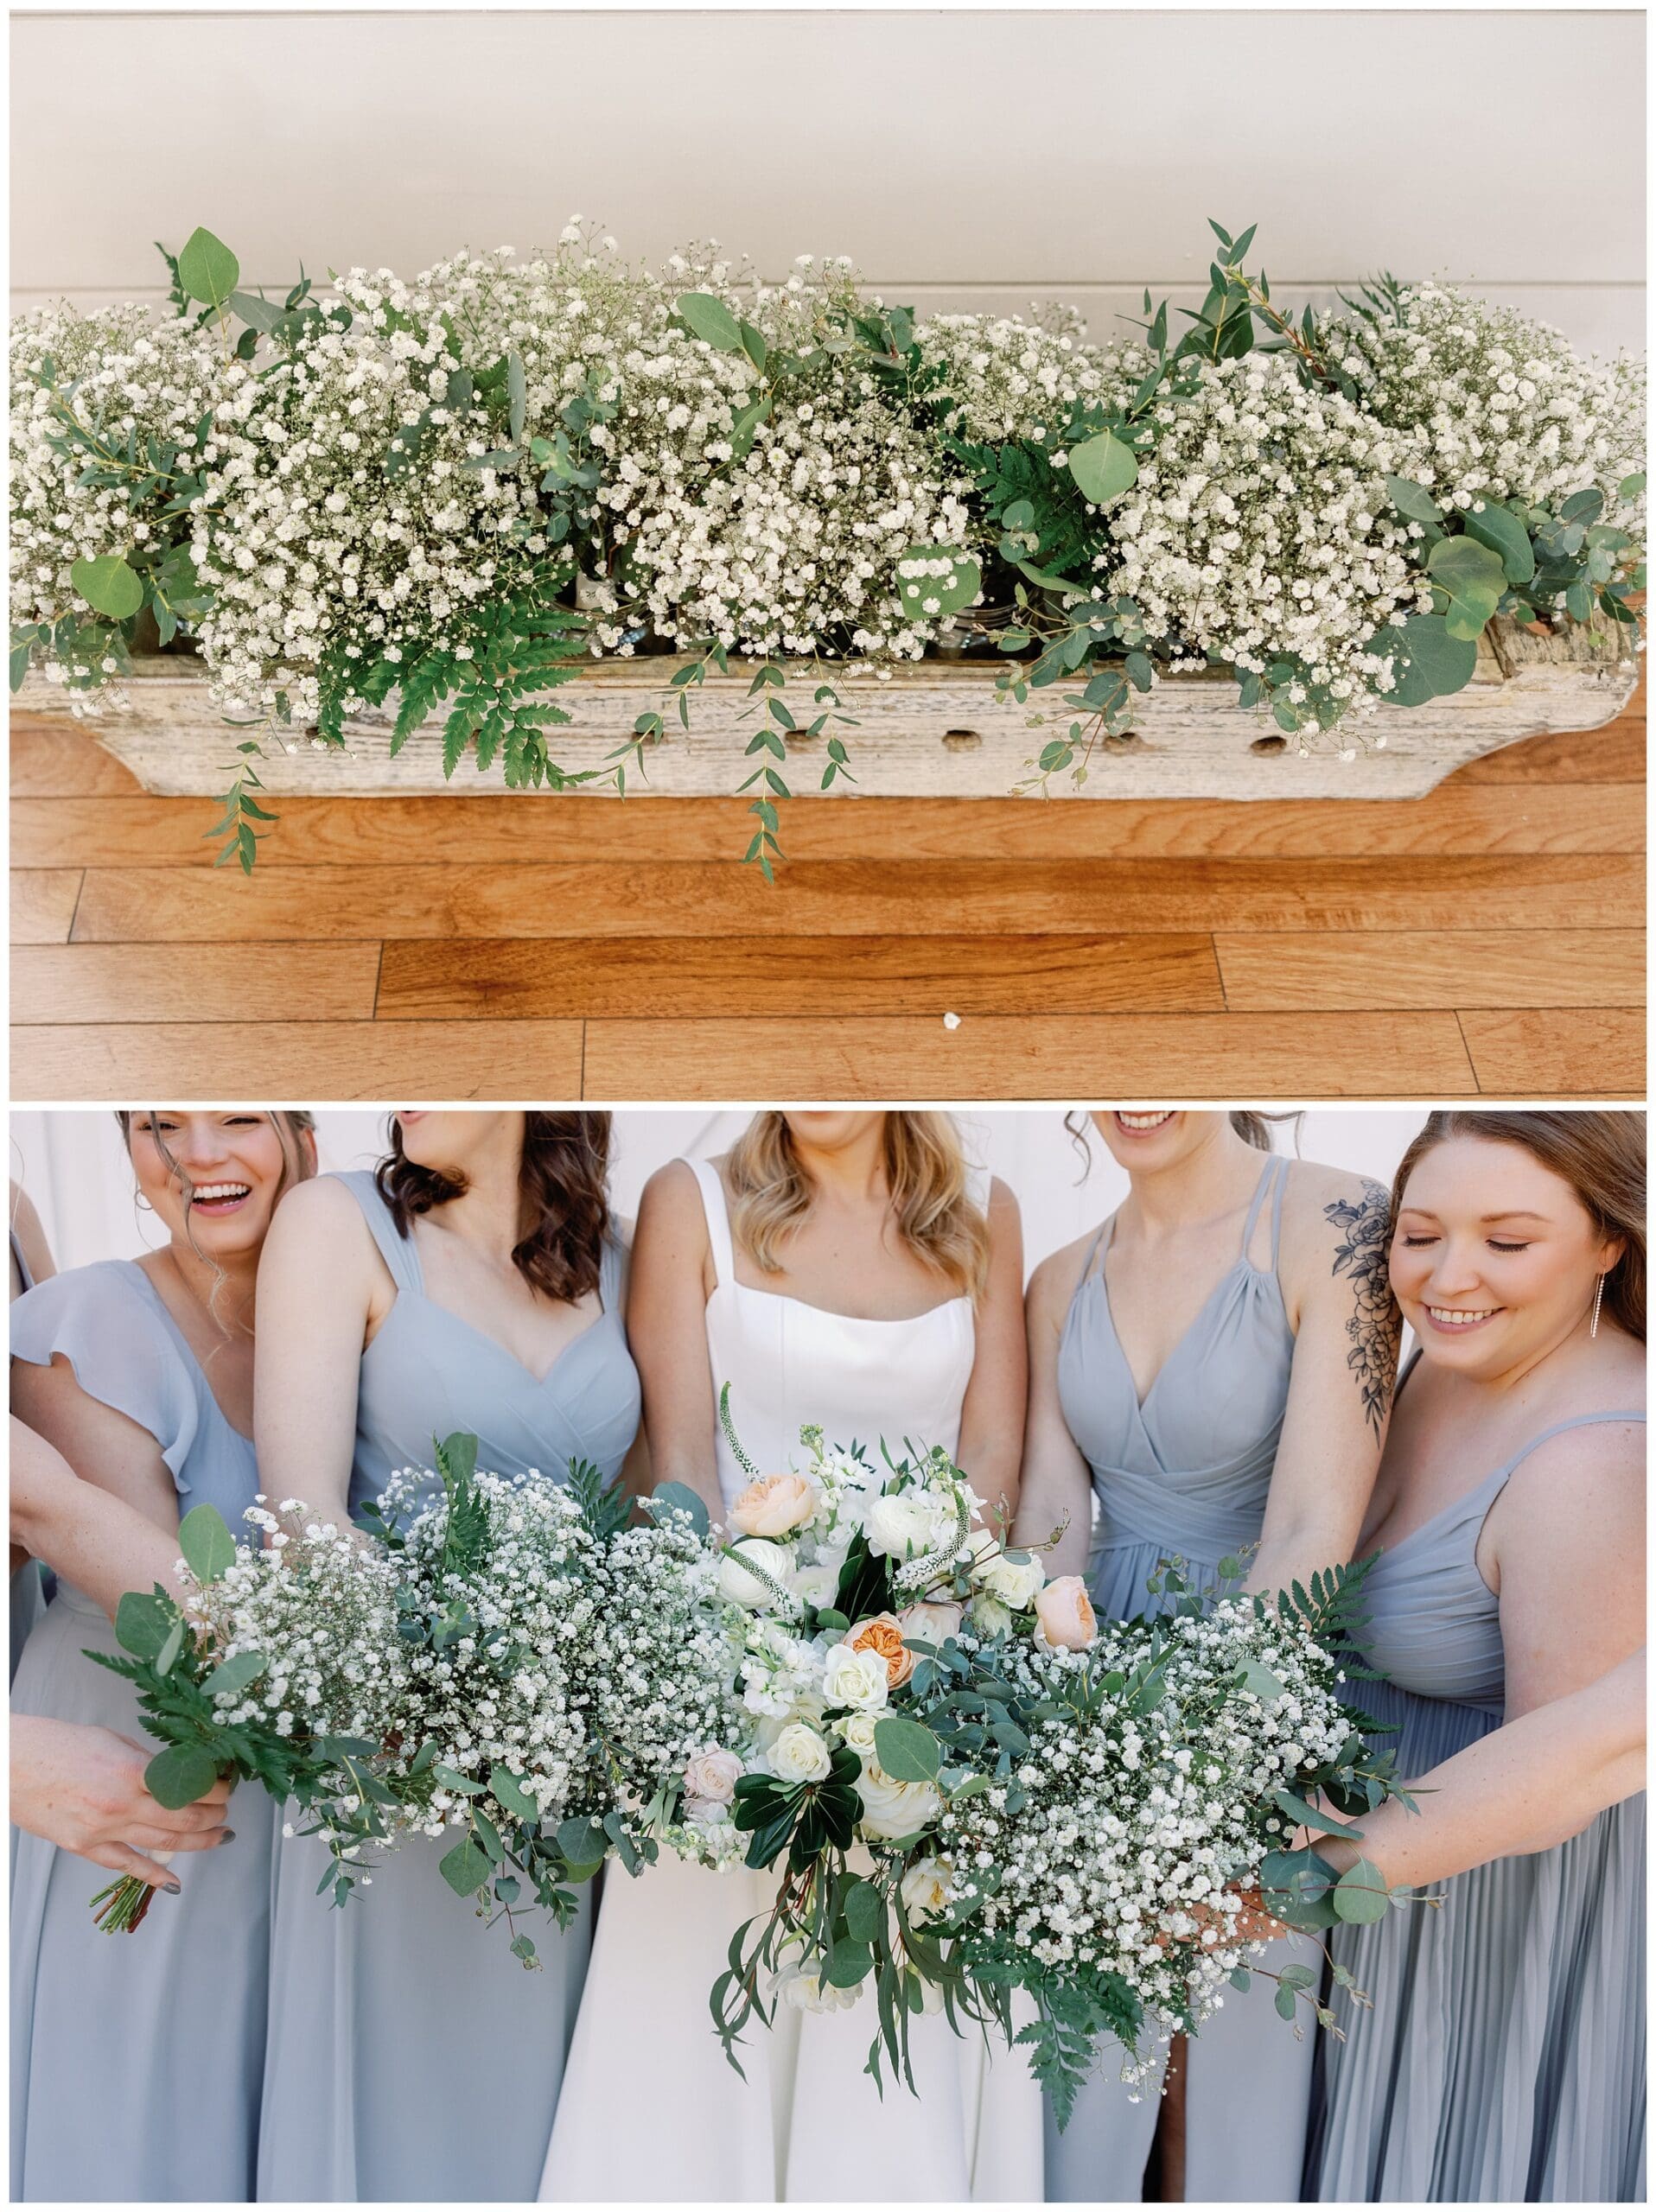 The bride and bridesmaids are holding baby's breath bouquets.